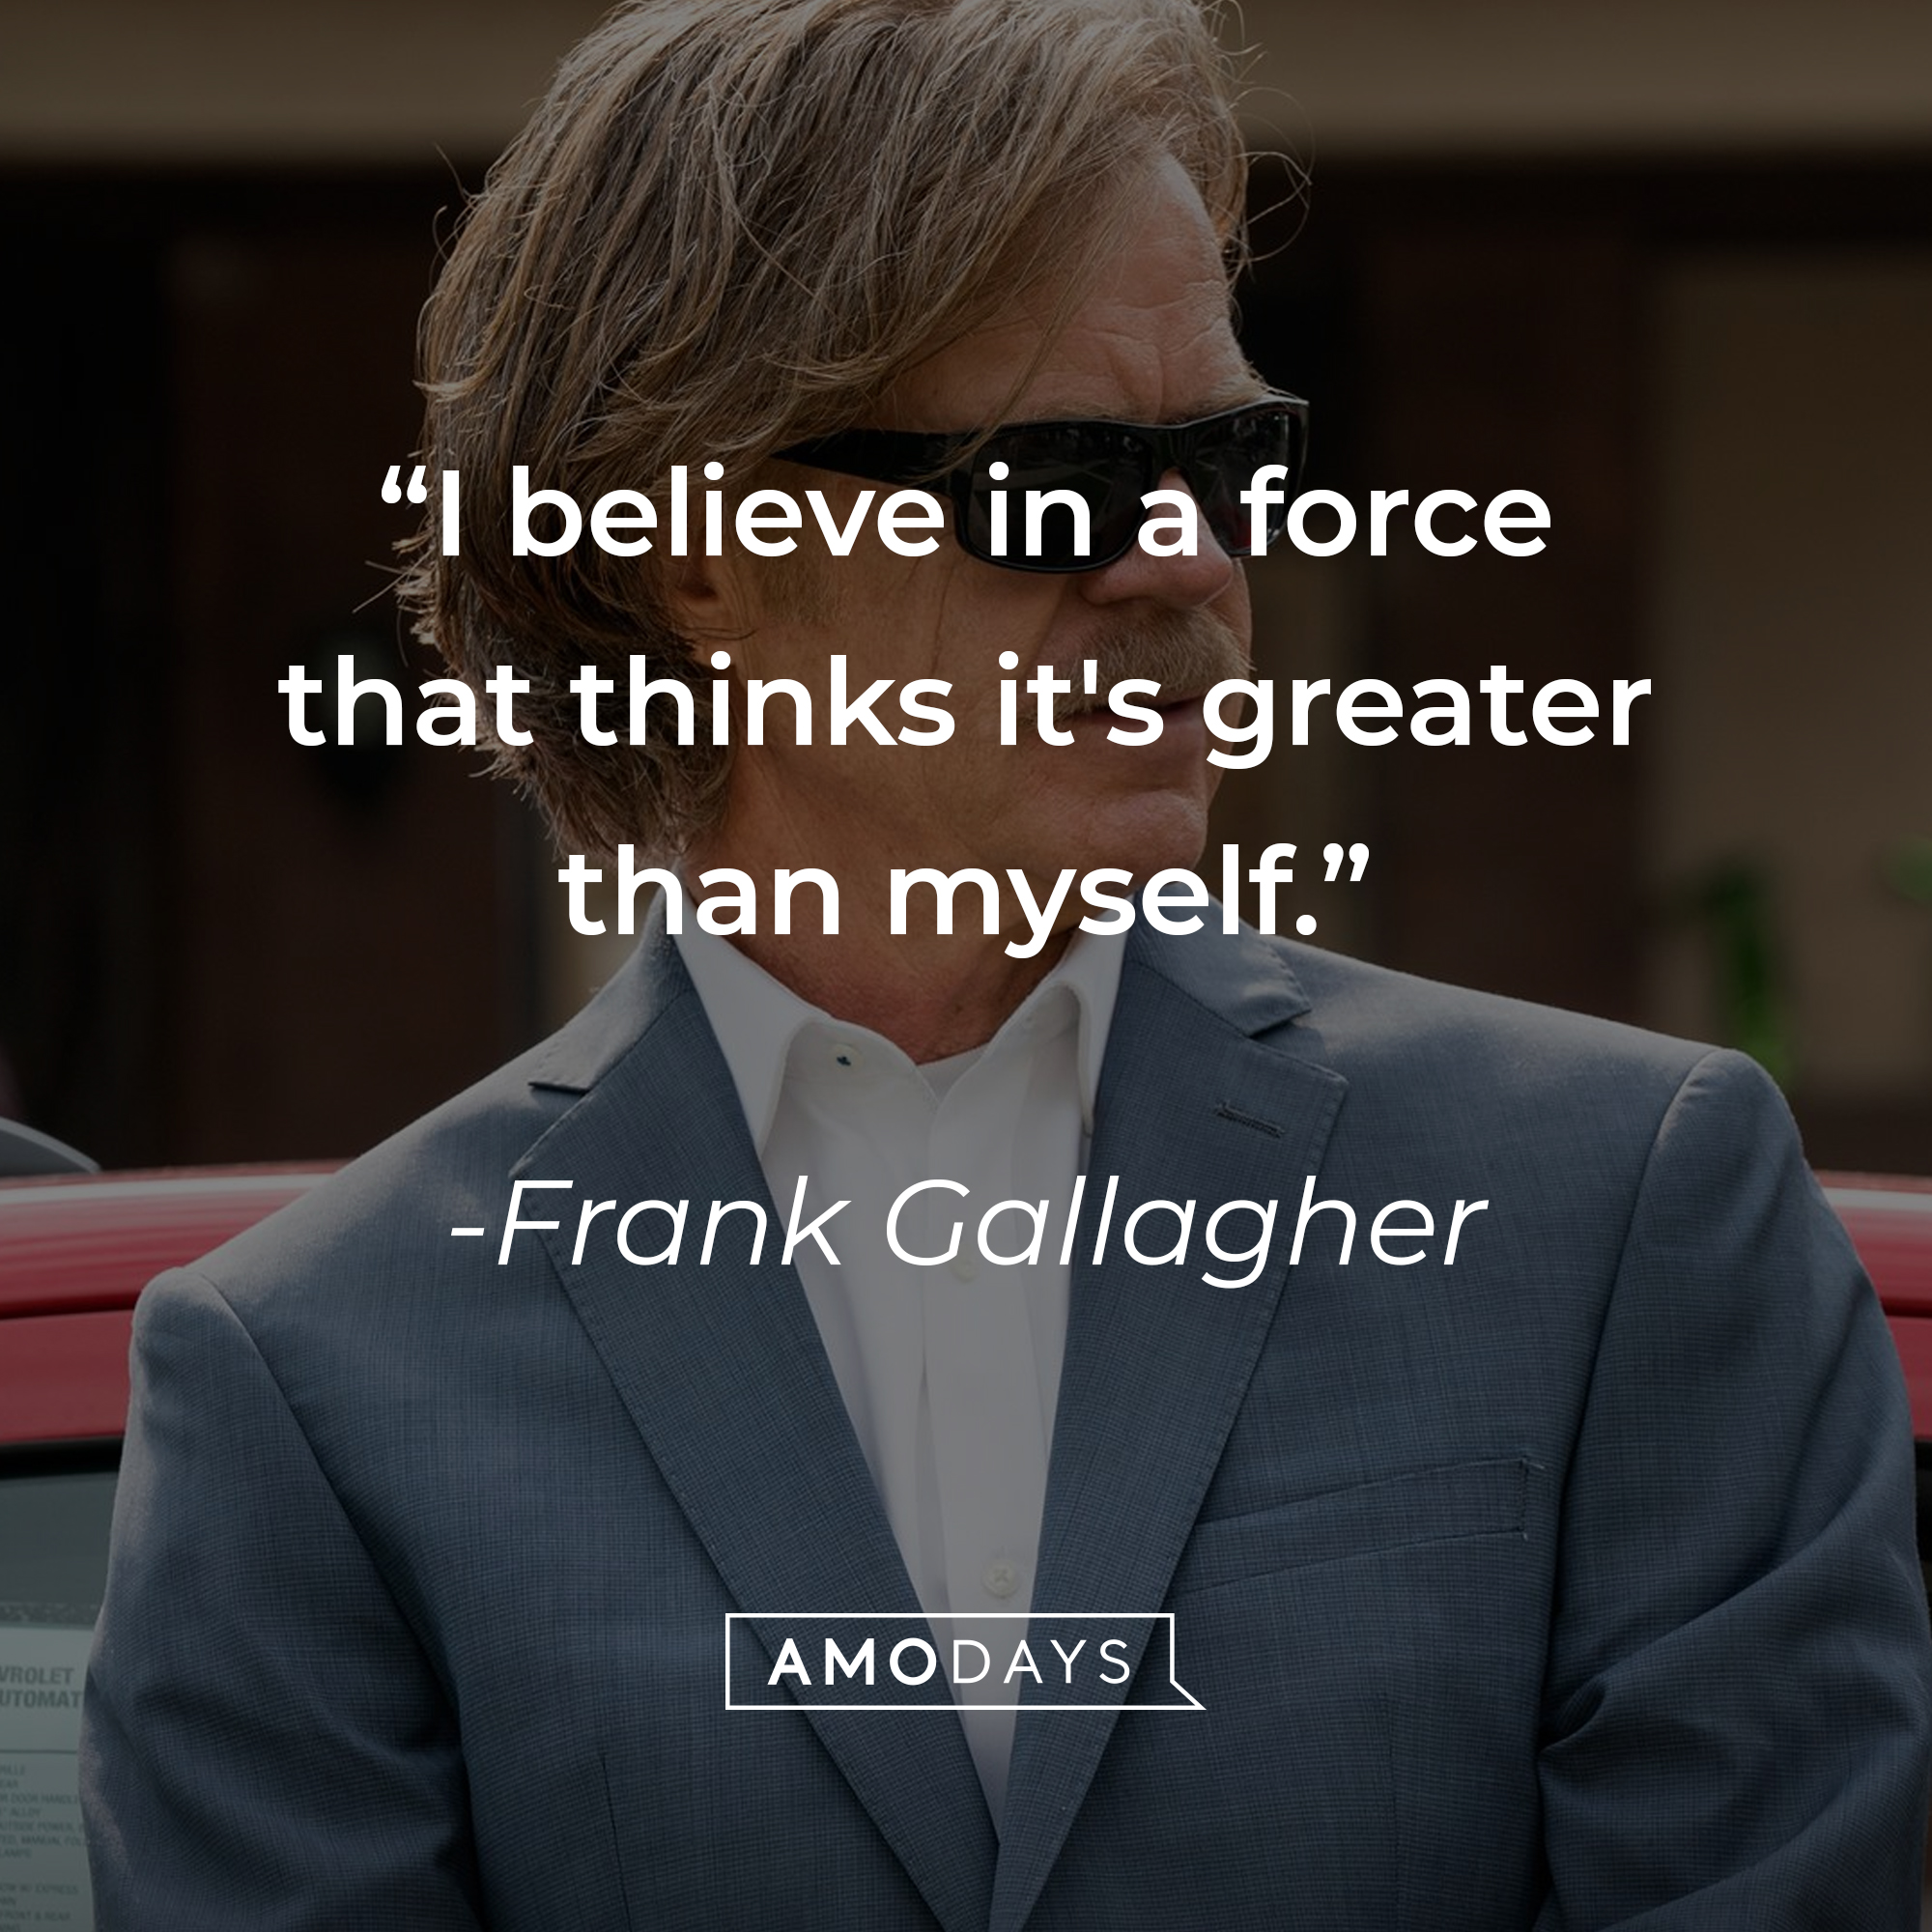 Frank Gallagher's quote: "I believe in a force that thinks it's greater than myself." | Source: facebook.com/ShamelessOnShowtime